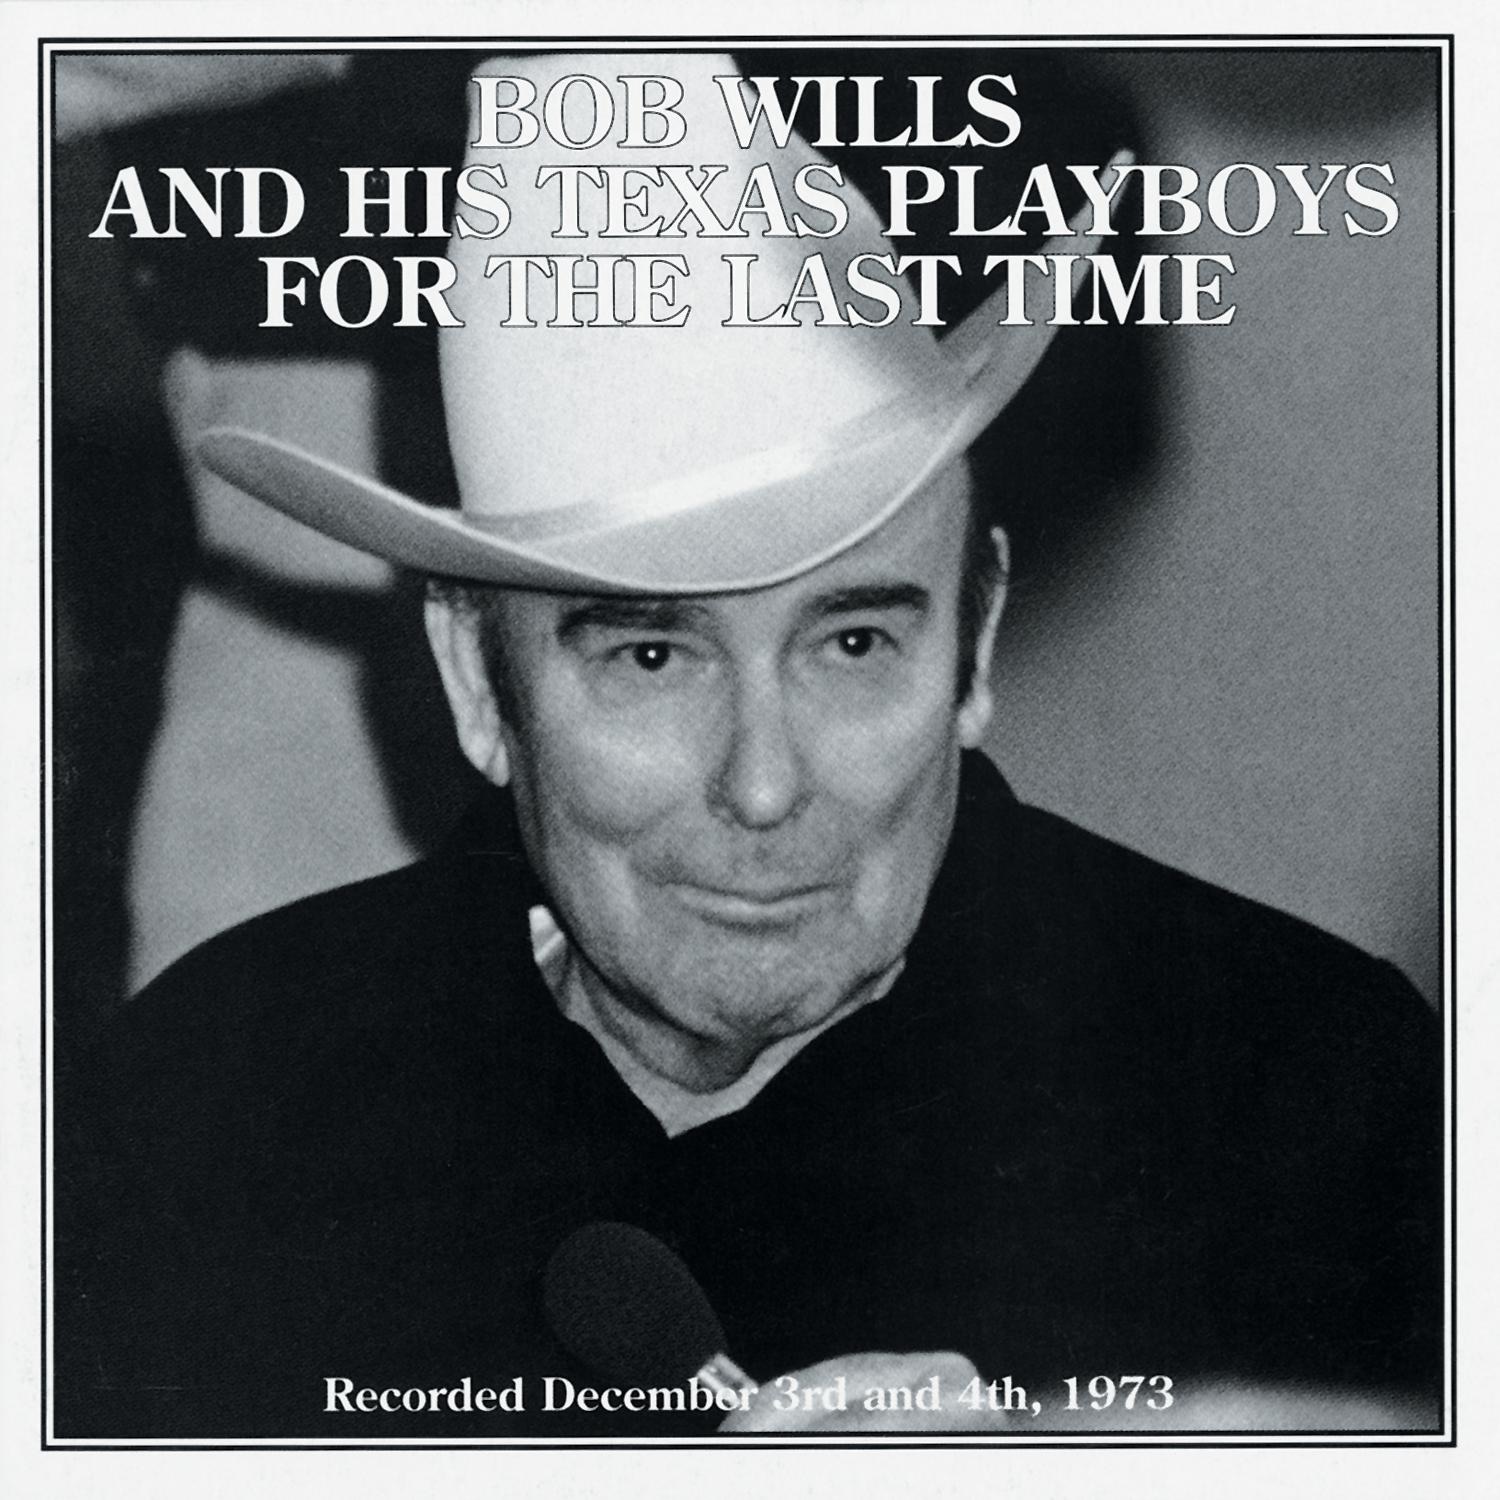 Art for Faded Love by Bob Wills & His Texas Playboys